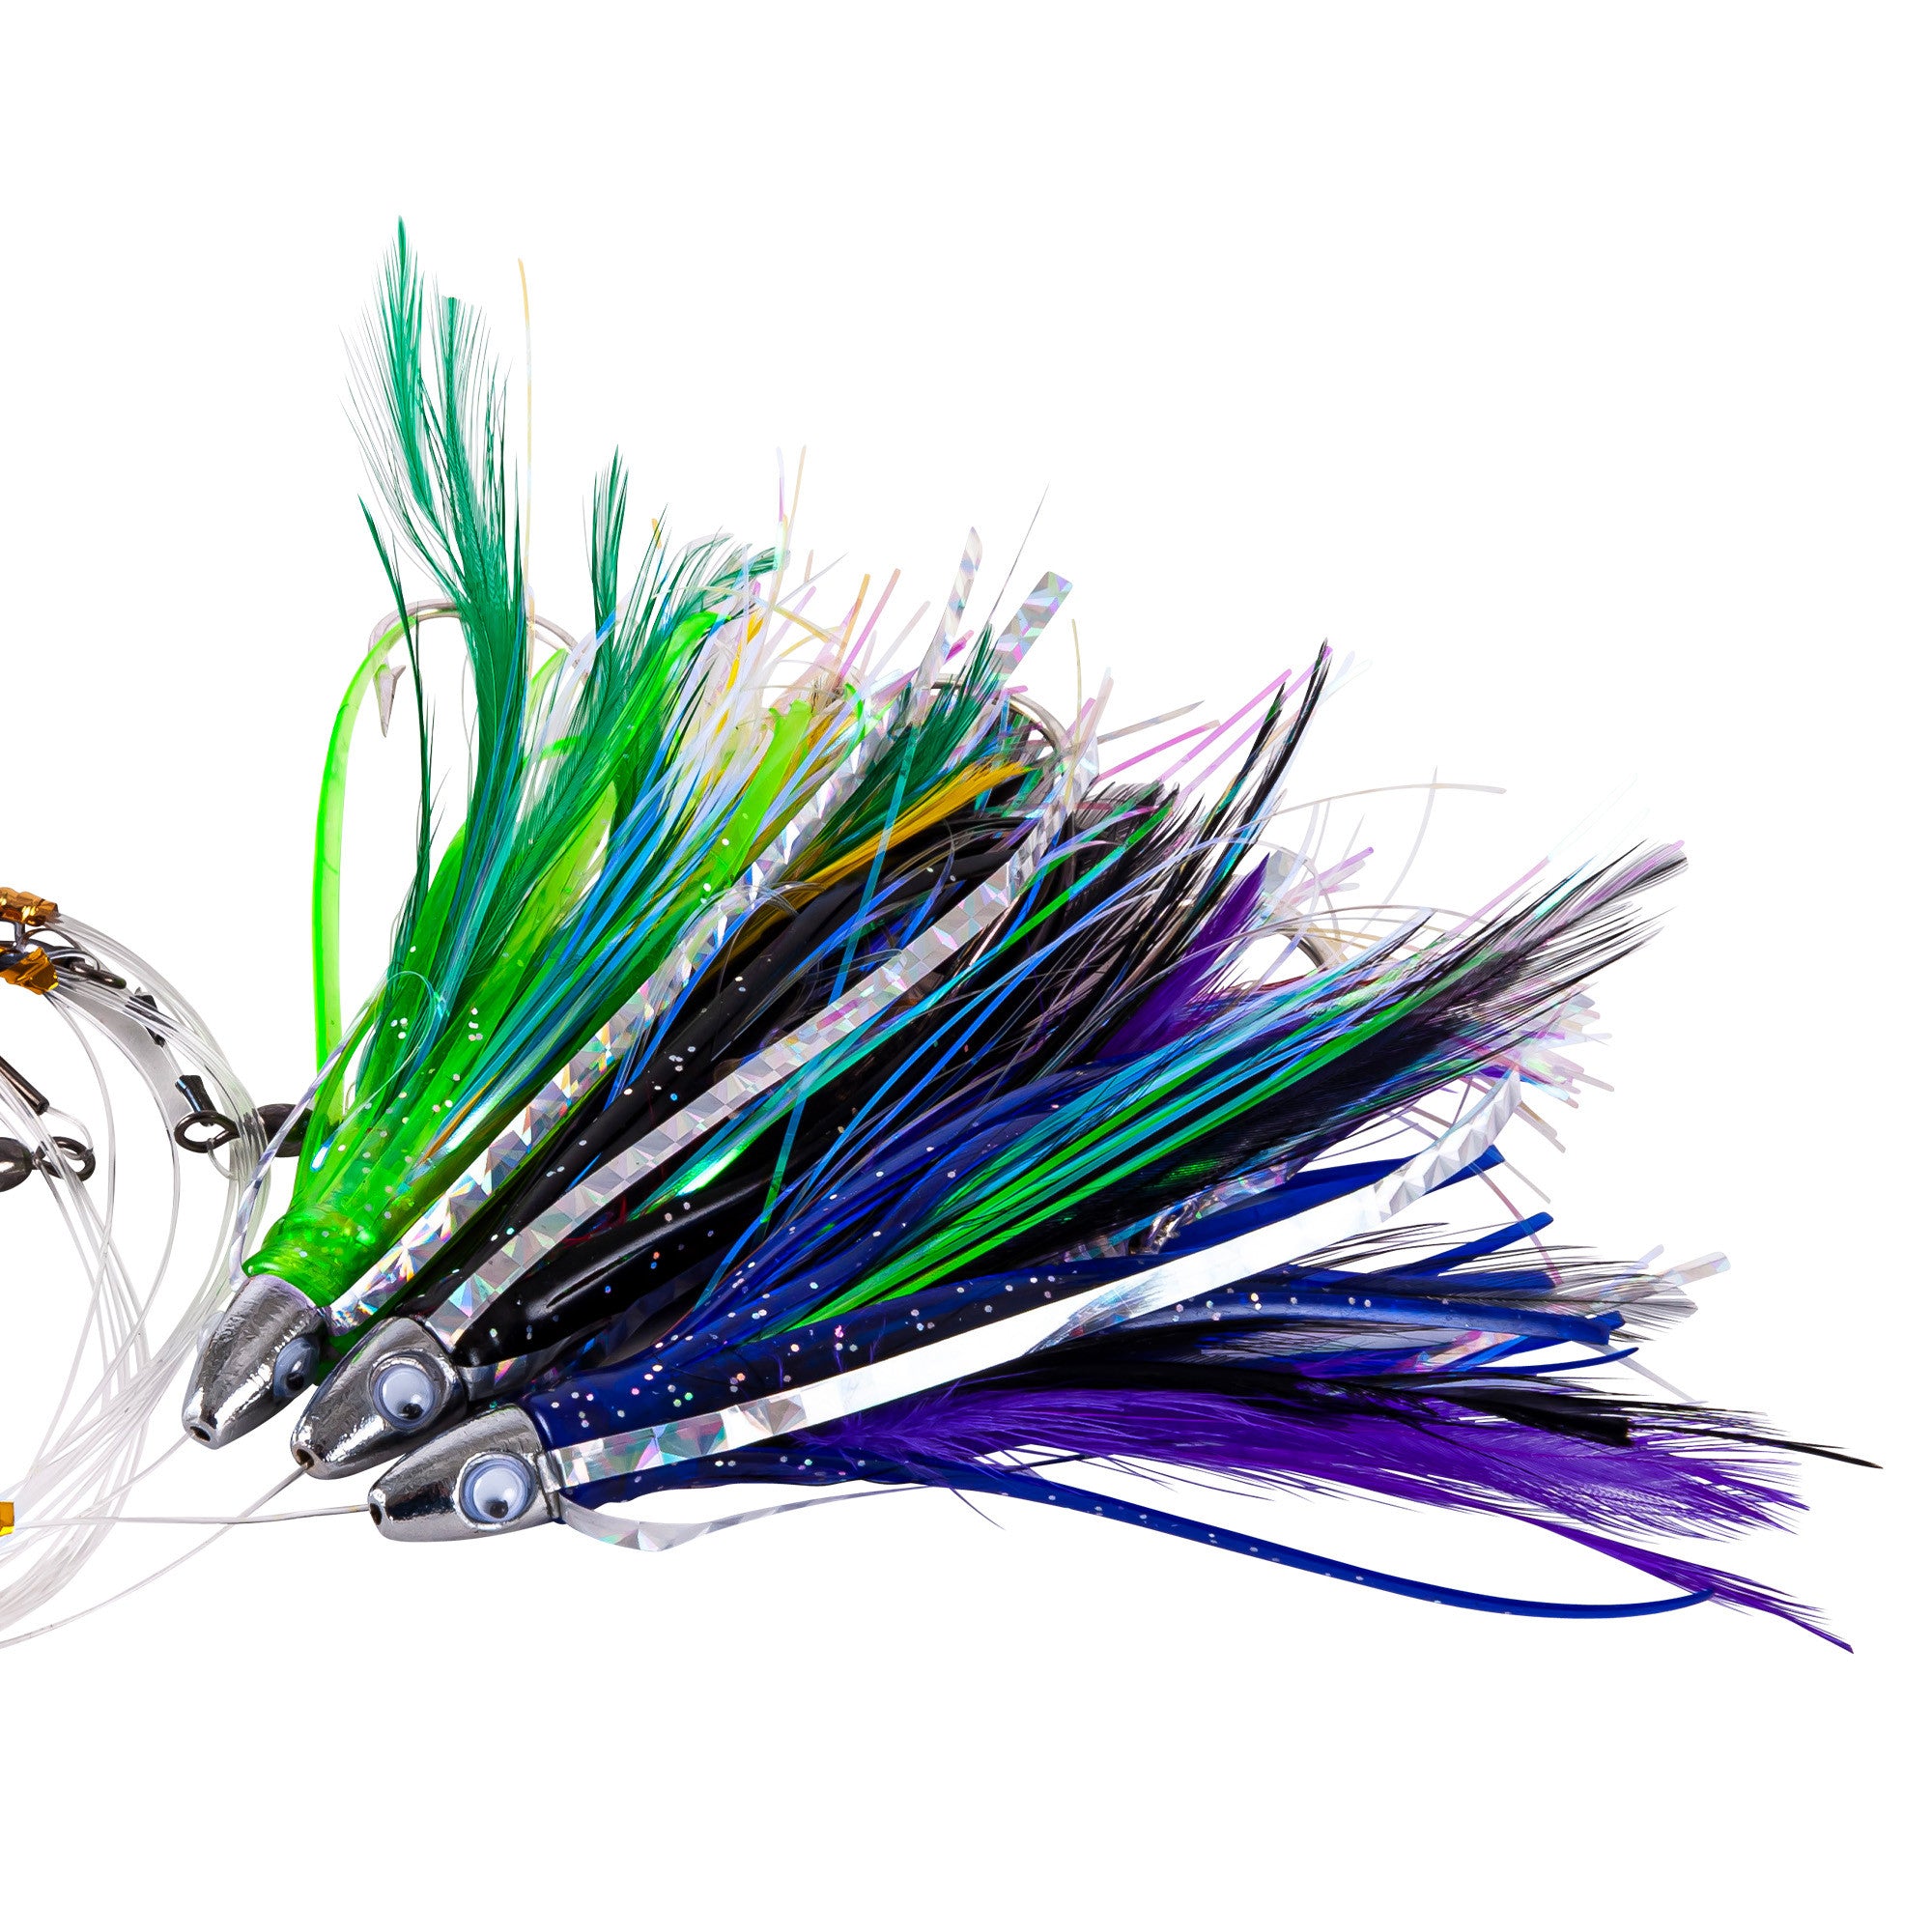 Load video: This lure is primarily designed to catch tunas, mahi mahi in the 5 to 25lb range but will catch larger tunas, mahi mahi or dorado, wahoo, kingfish, marlin and more if rigged with heavier leader or wire leader.